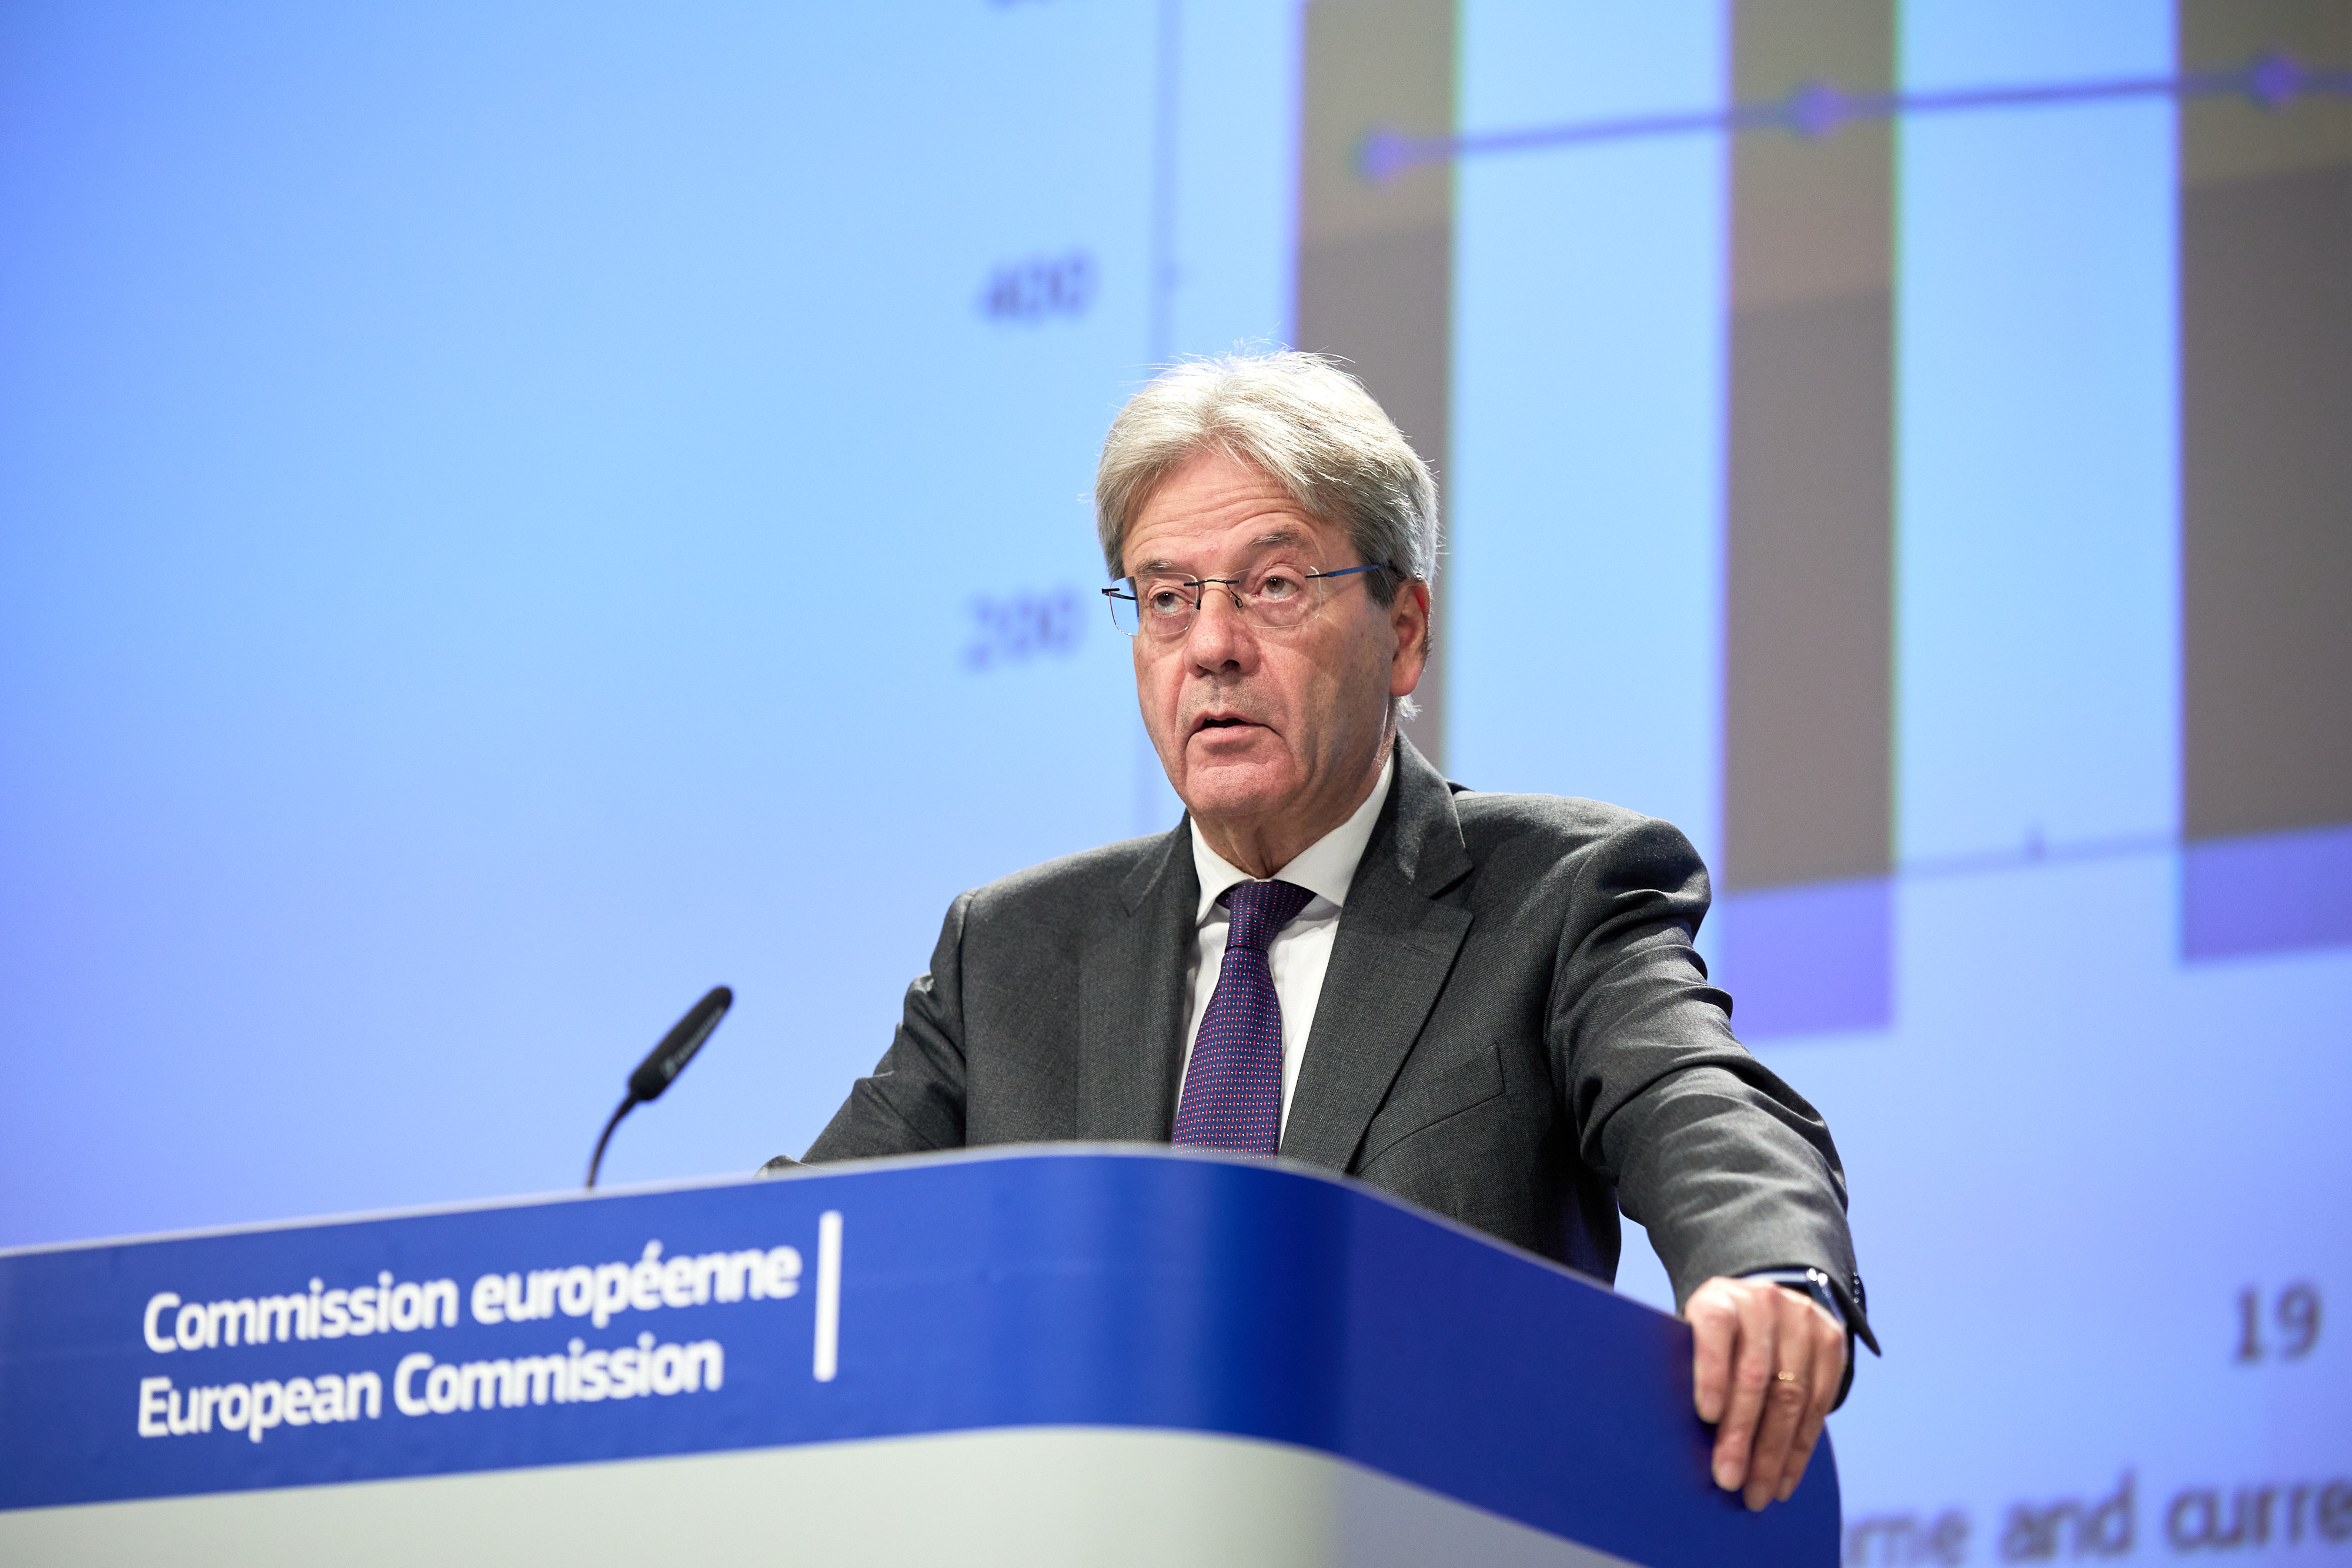 Paolo Gentiloni, European Commissioner for Economy, holds a press conference on the Autumn Economic Forecast. ©European Union